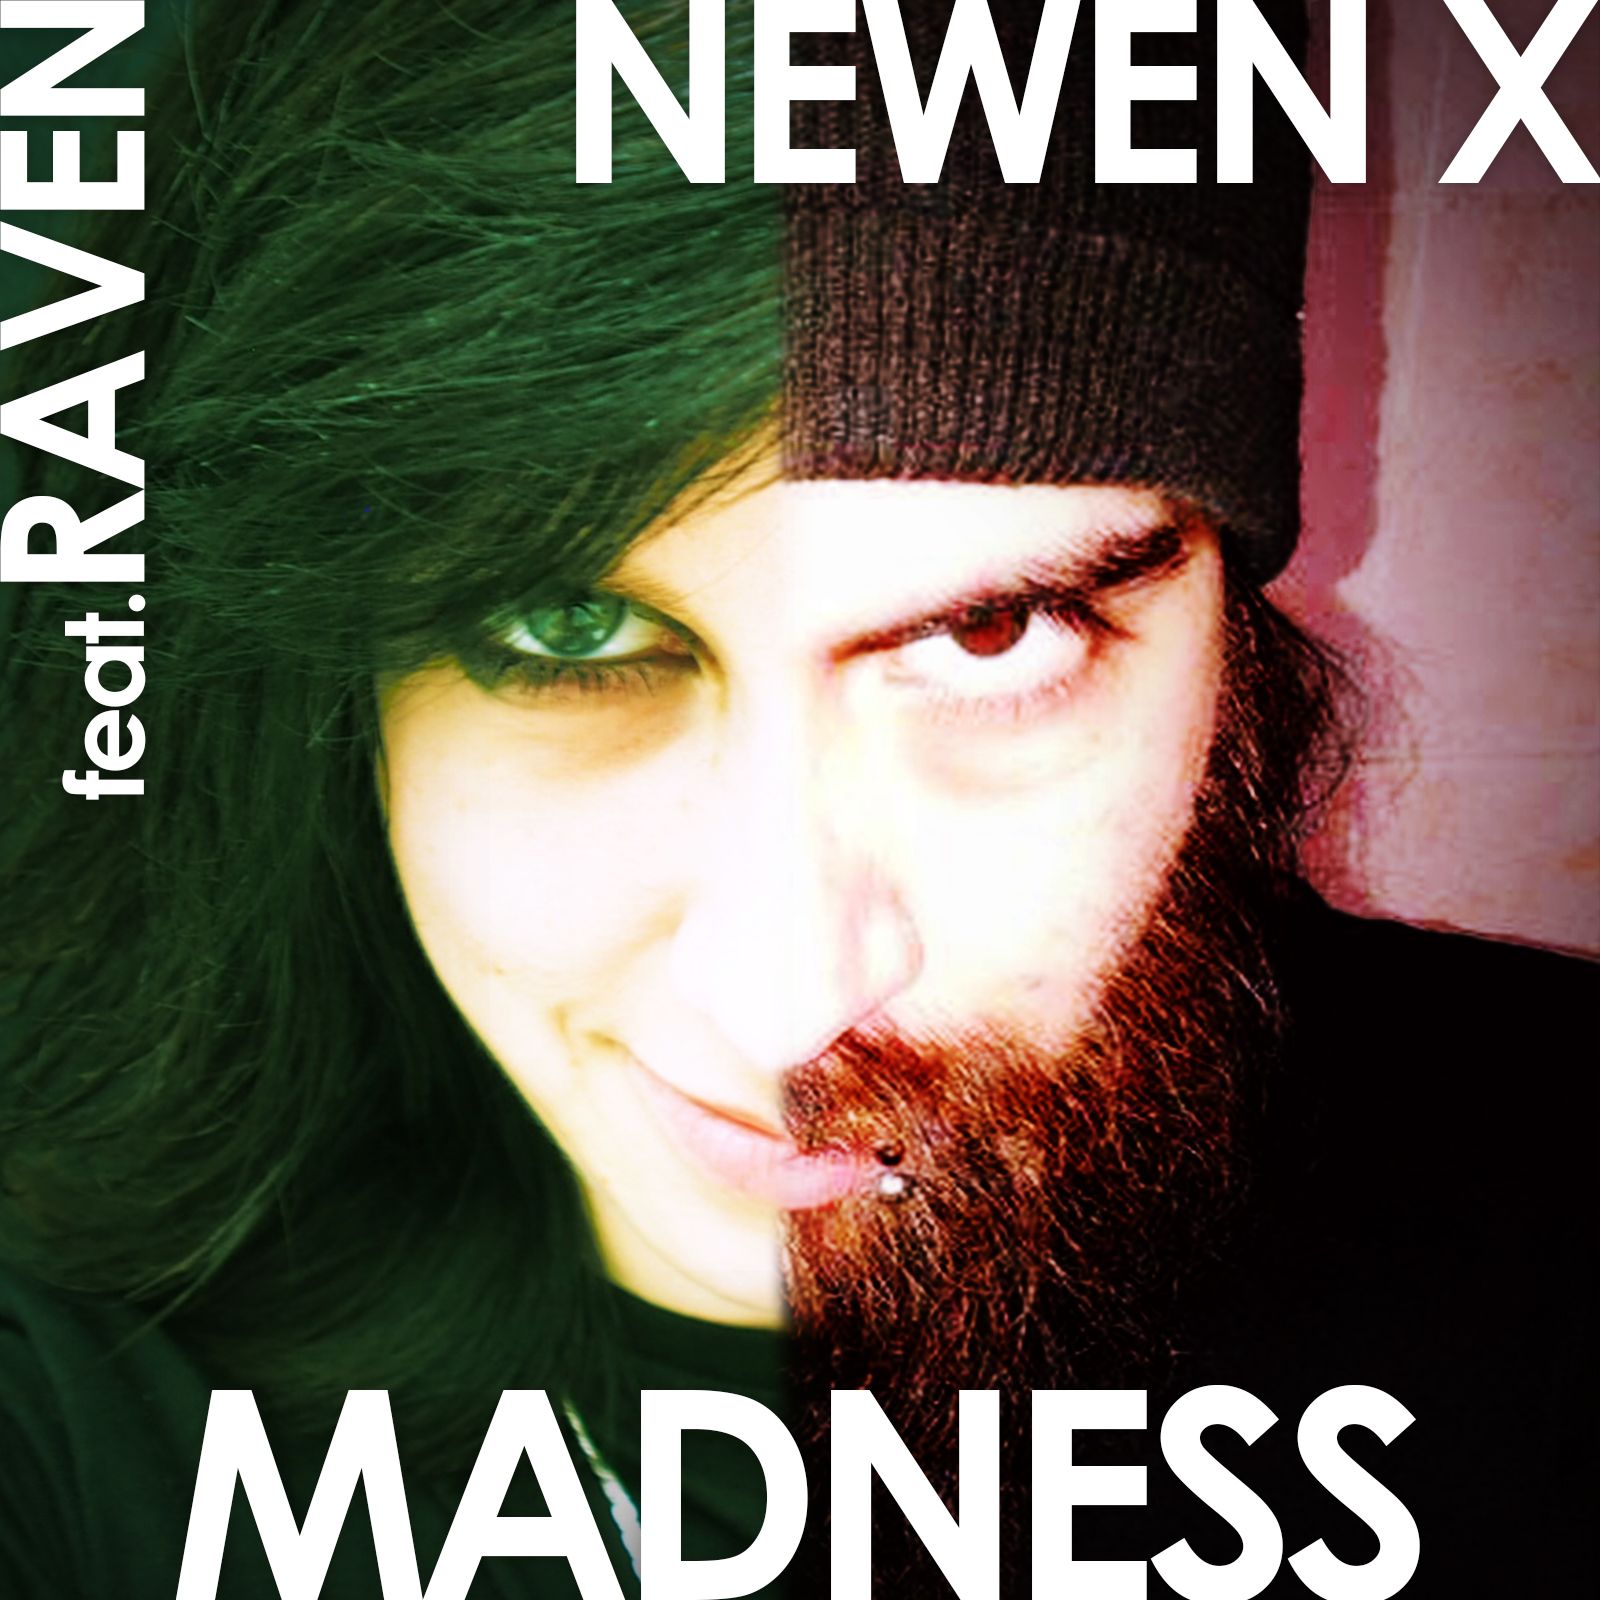 CD Cover Newen X feat. Raven - Madness.jpg